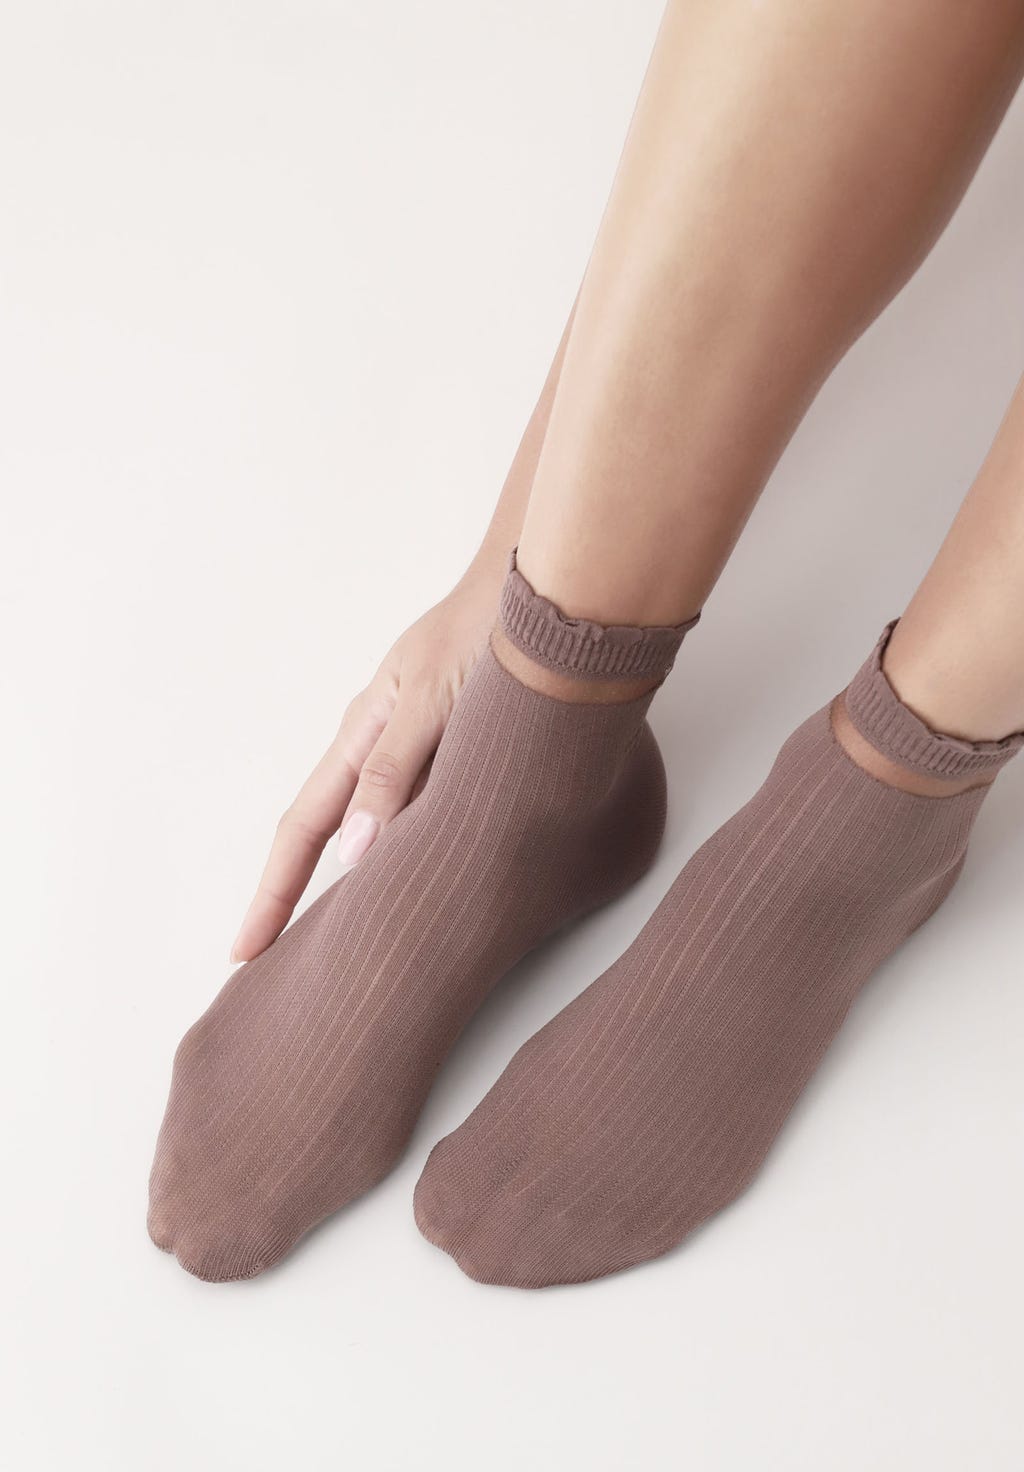 OroblÌ_ Gentle Sock - Light brown ribbed cotton fashion ankle socks with a sheer striped cuff and scalloped edge.